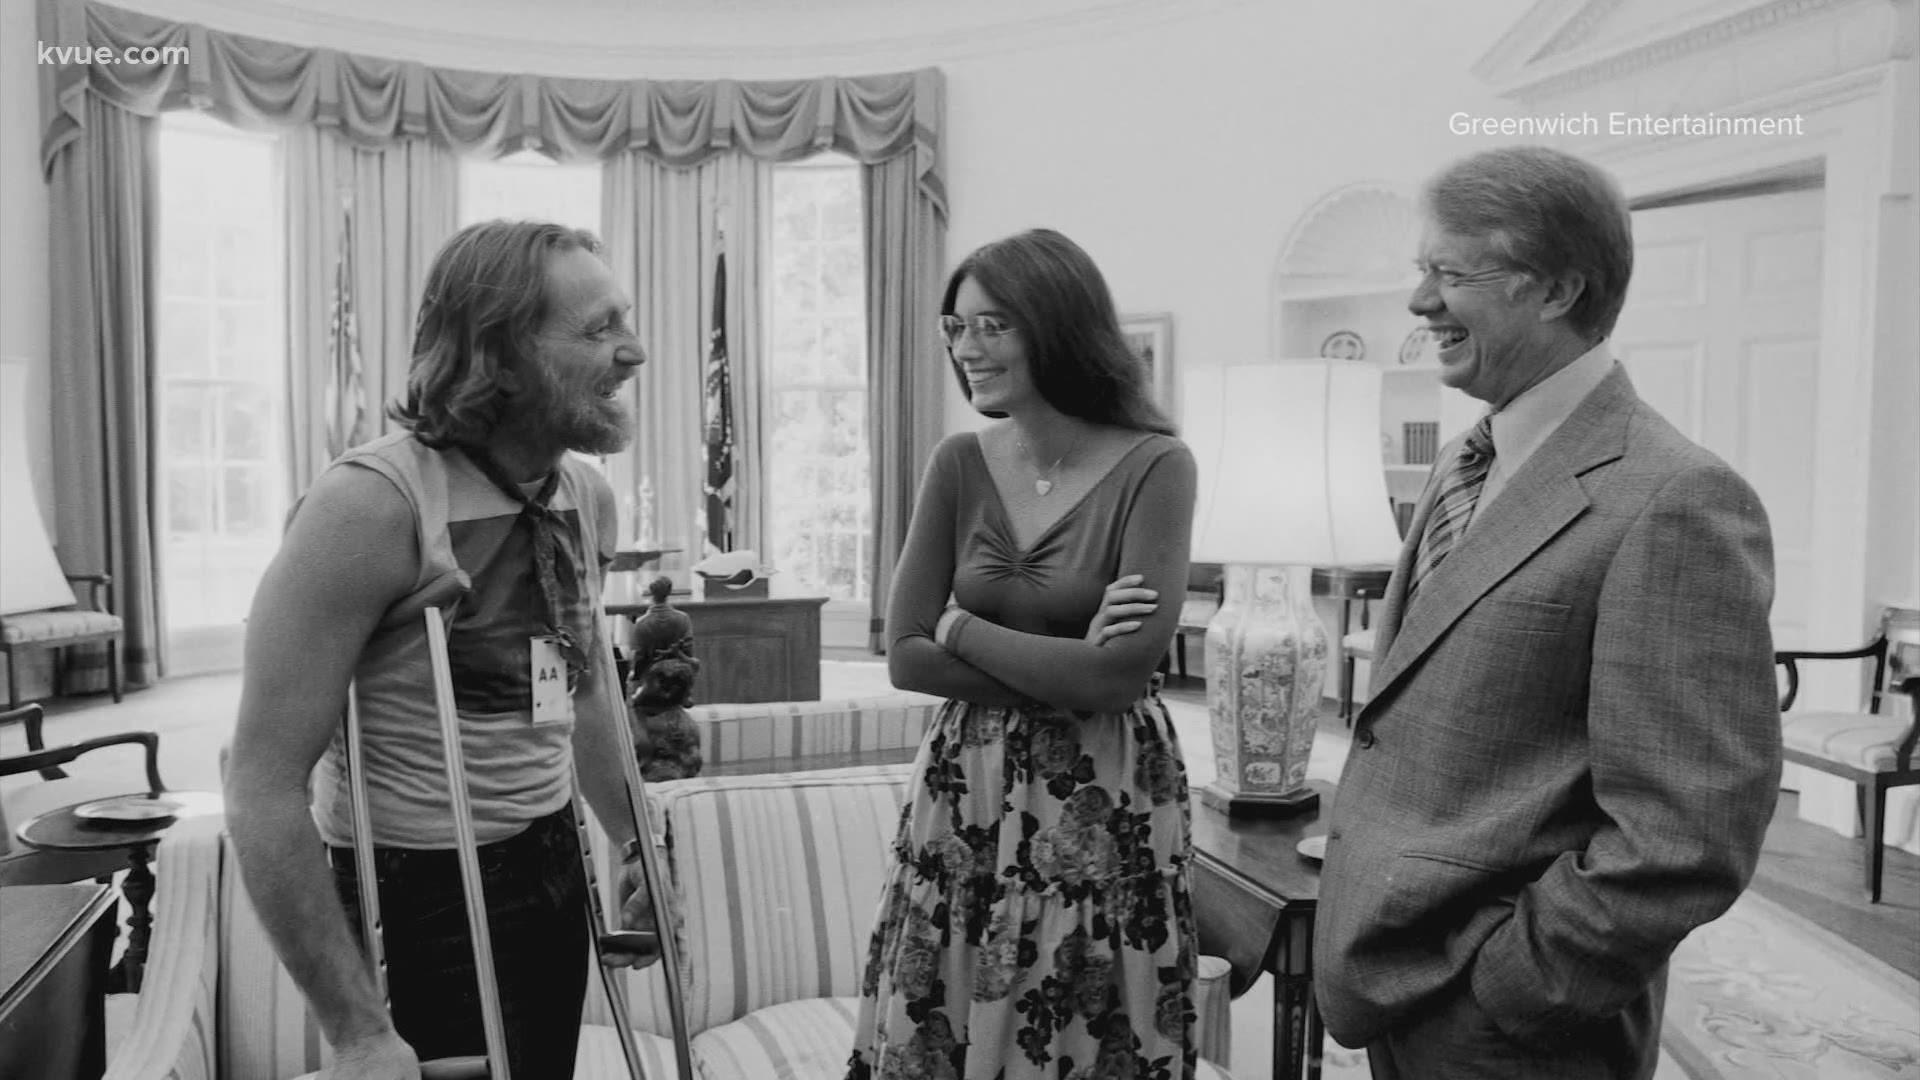 President Carter said he remembers Willie Nelson smoking marijuana with one of his sons at the White House.